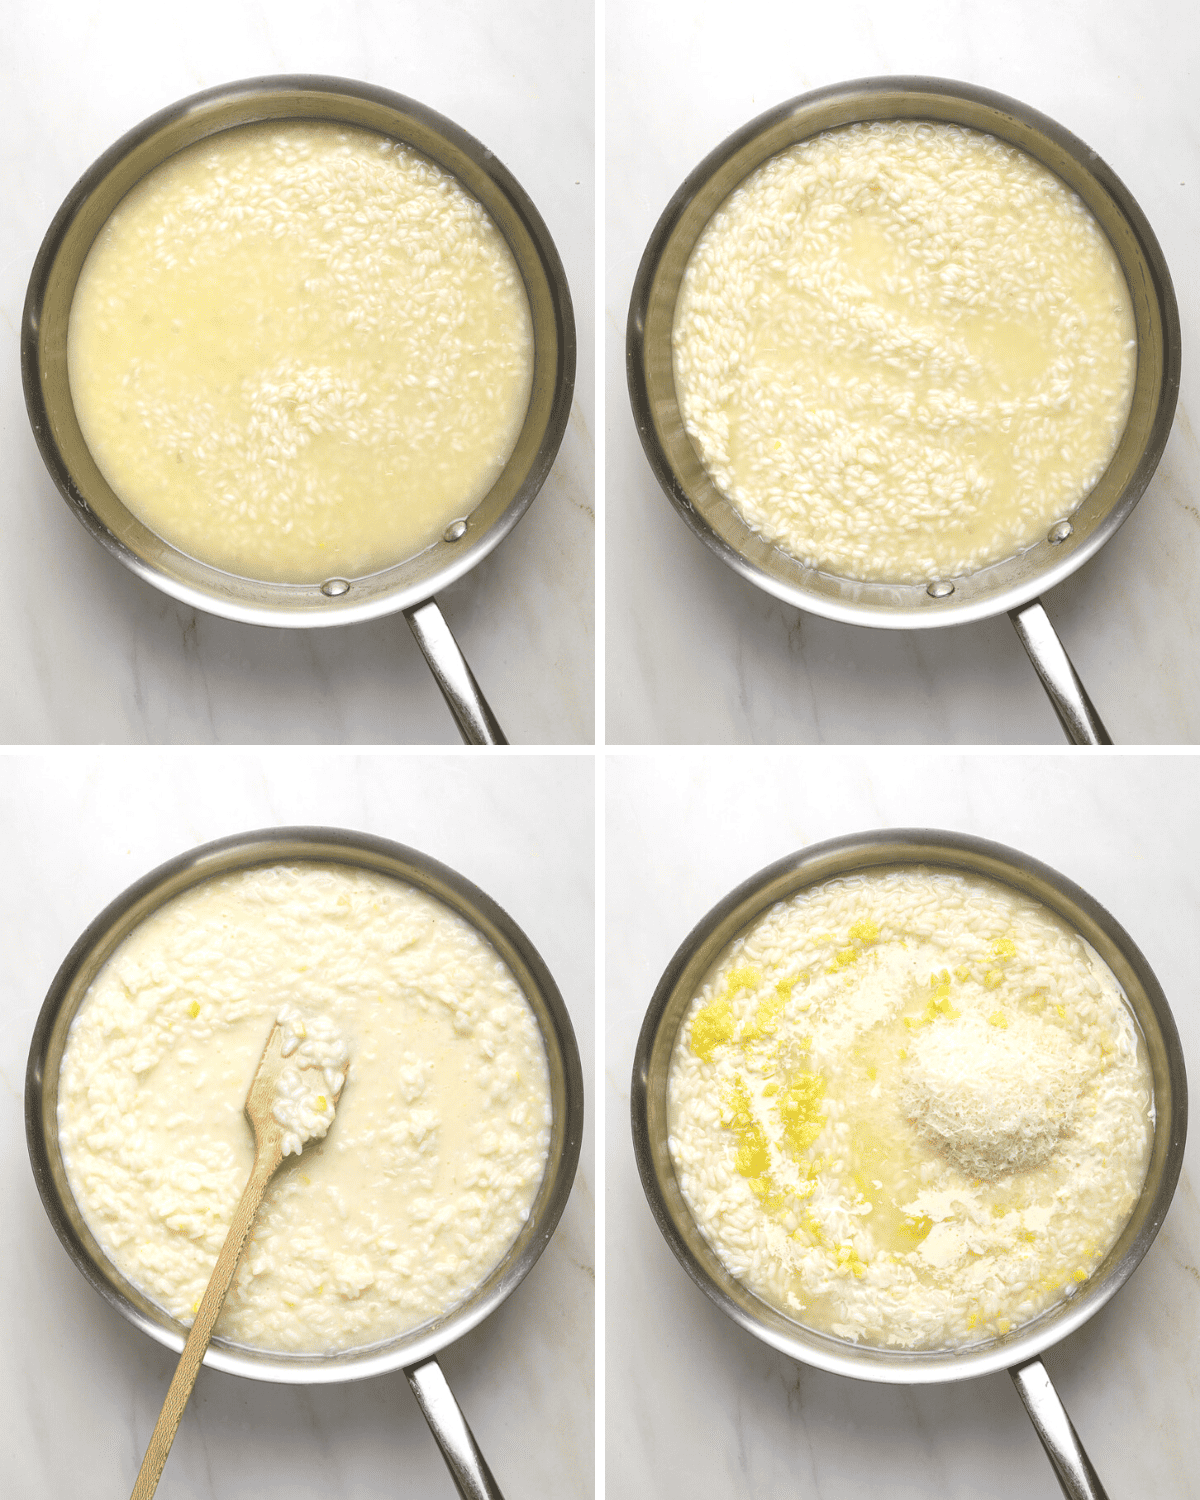 Four step by step images showing risotto being stirred together in a stainless steel pan.